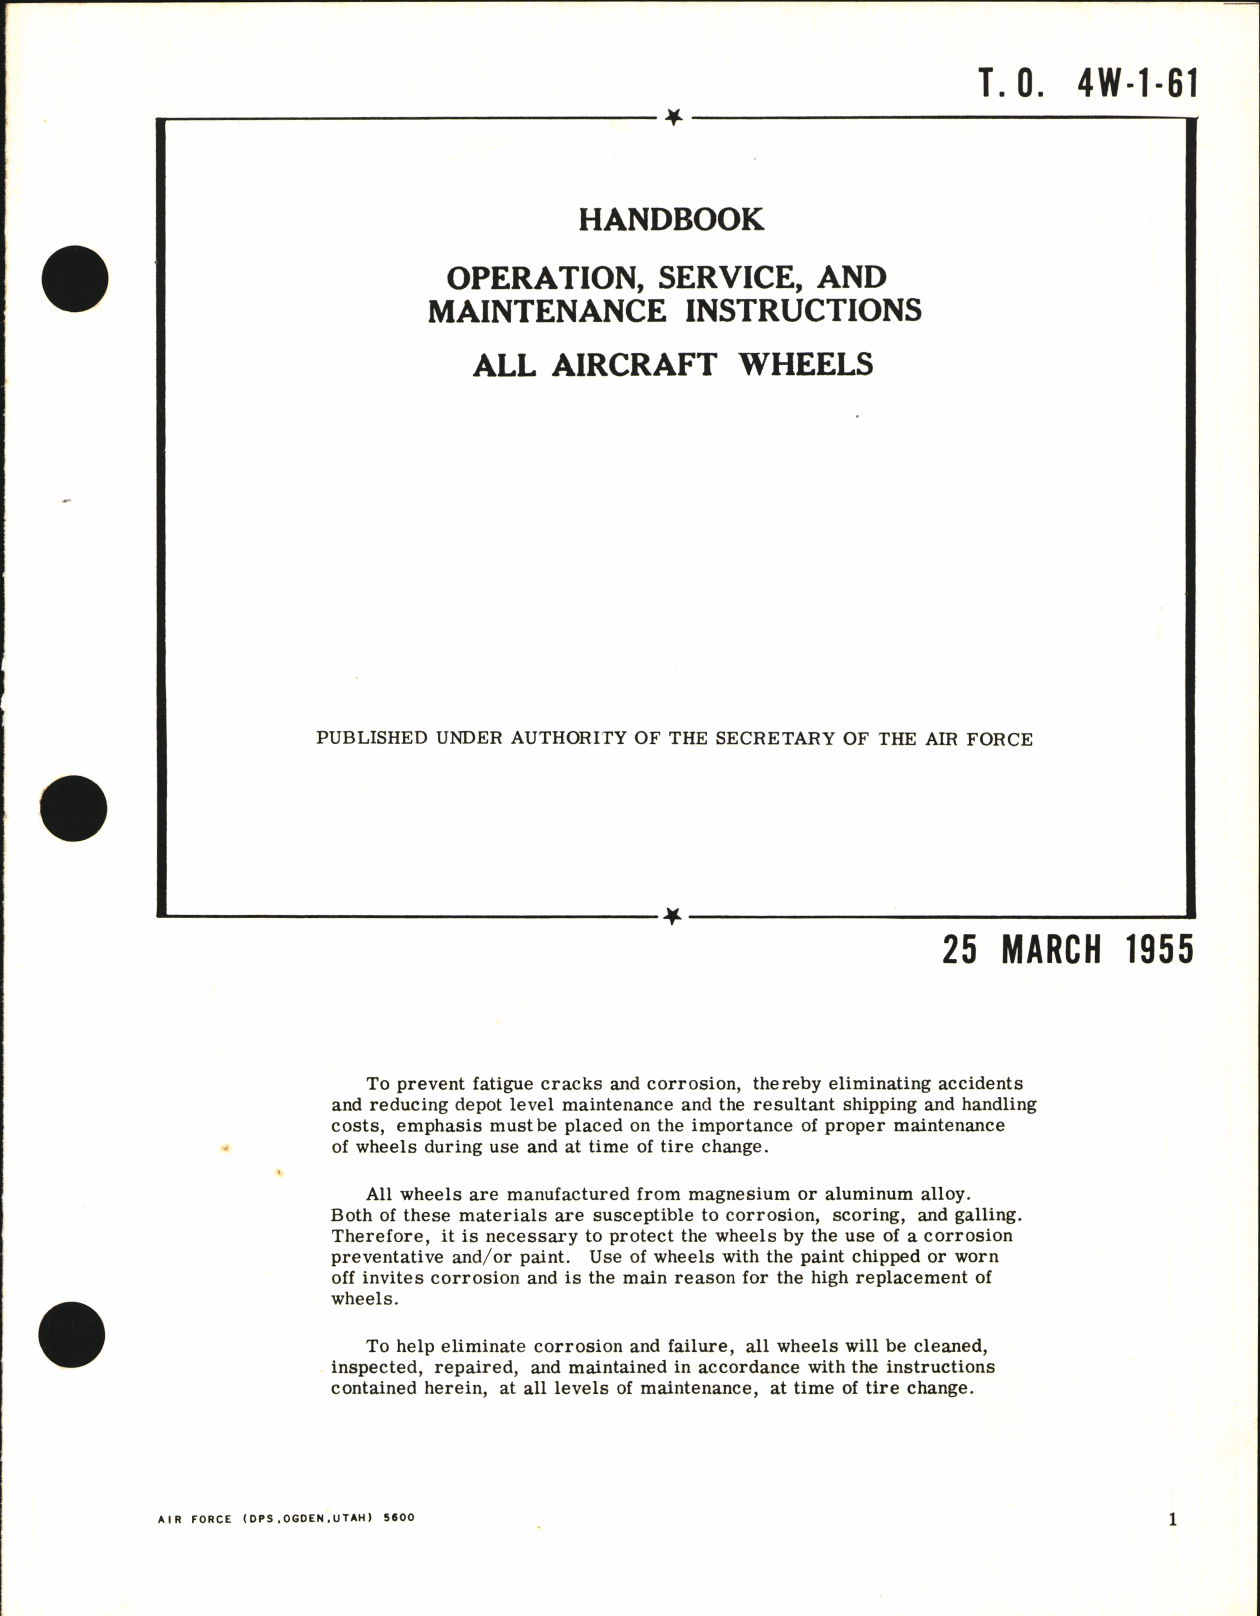 Sample page 1 from AirCorps Library document: Operation, Service, and Maintenance Instructions for All Aircraft Wheels